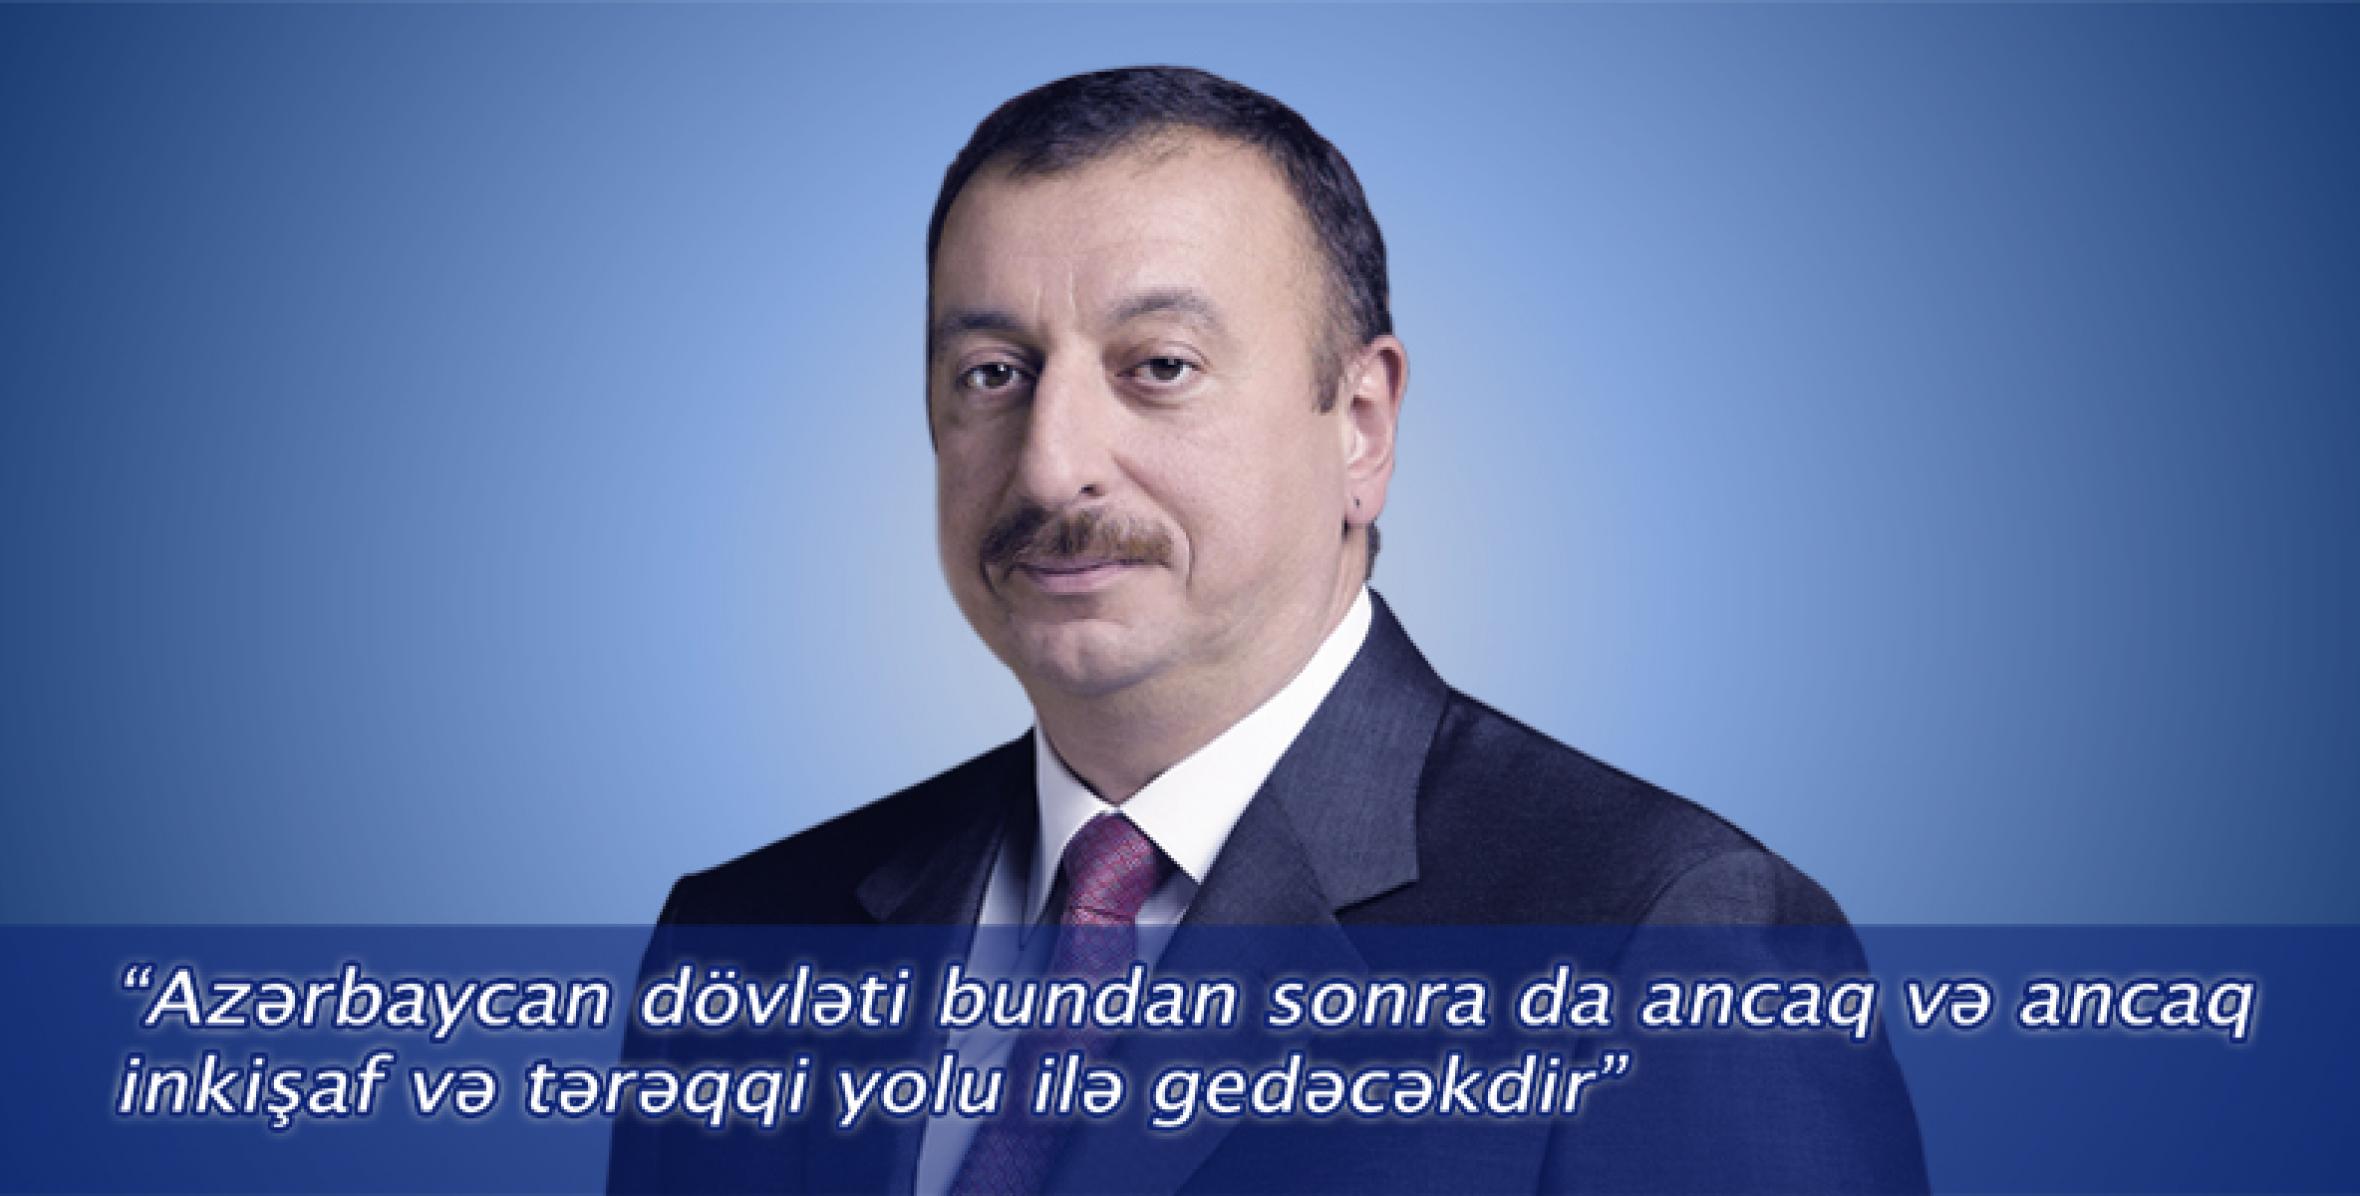 President Ilham Aliyev’s Greetings to the Azerbaijani People on World Azerbaijanis’ Solidarity Day and the New Year